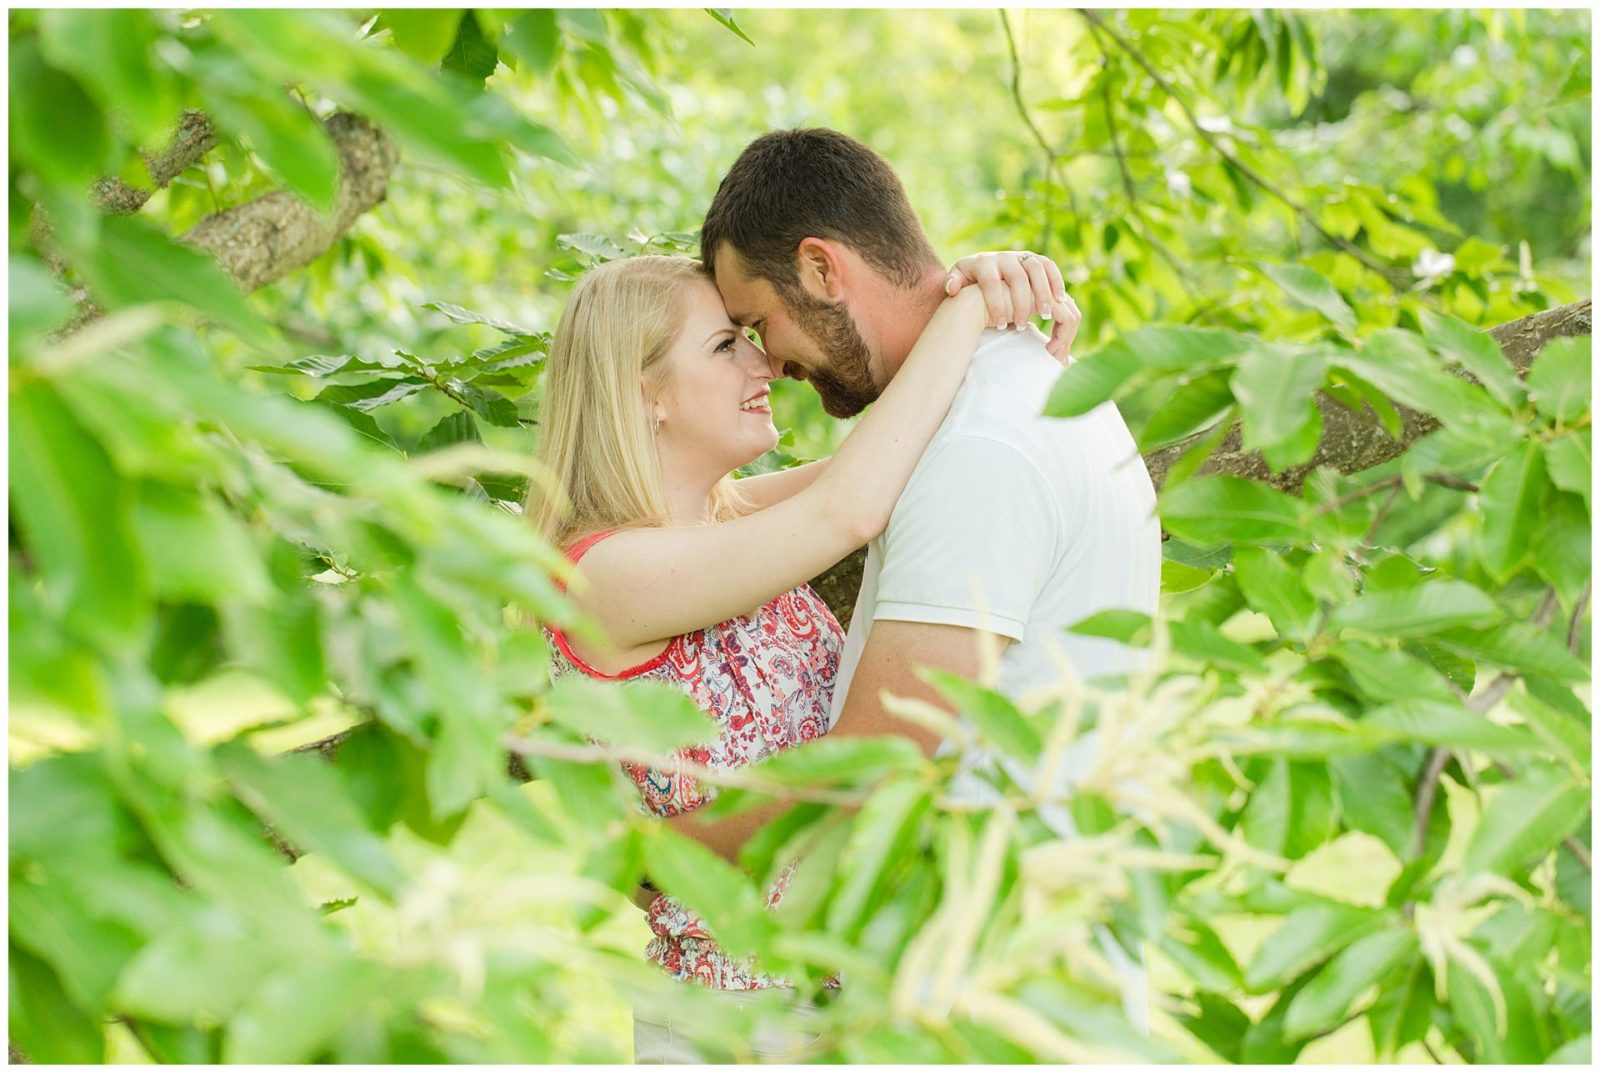 Engagement session in a garden at the Arboretum in Lexington, Kentucky.